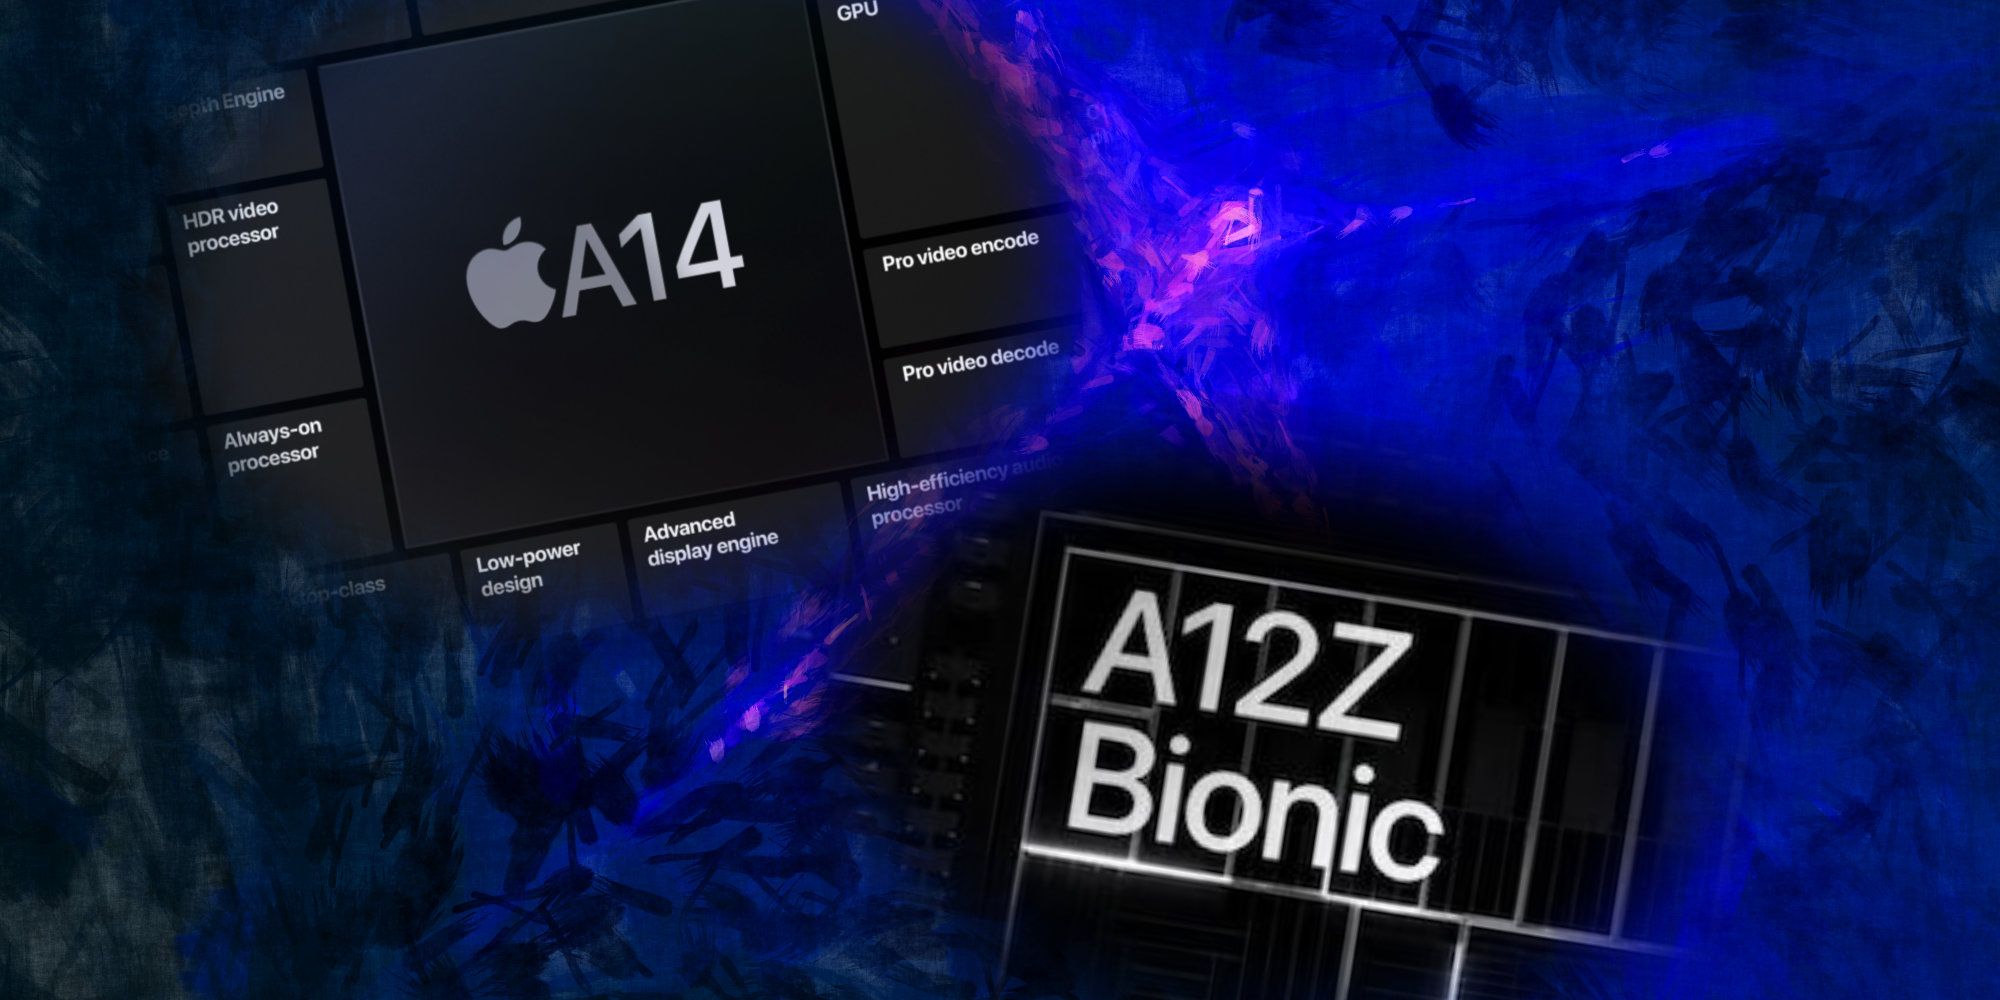 A14 Bionic Vs A12Z Apples iPad Air 4 & iPad Pro Chips Compared